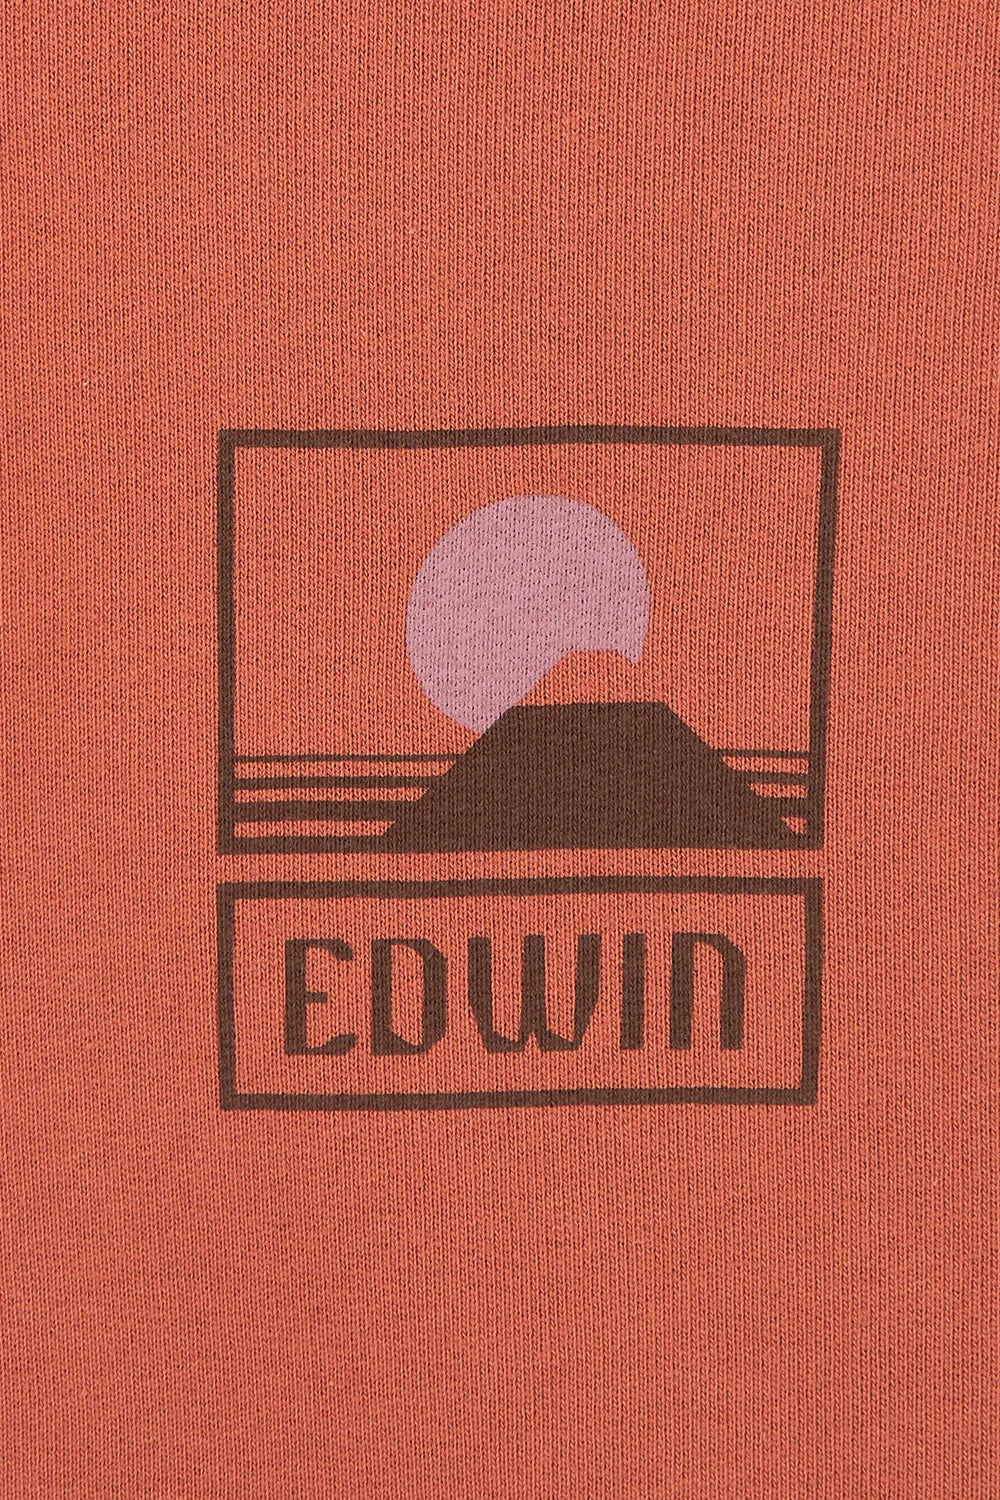 Edwin Sunset on Mt Fuji Hoodie Sweat (Baked Clay) | Number Six